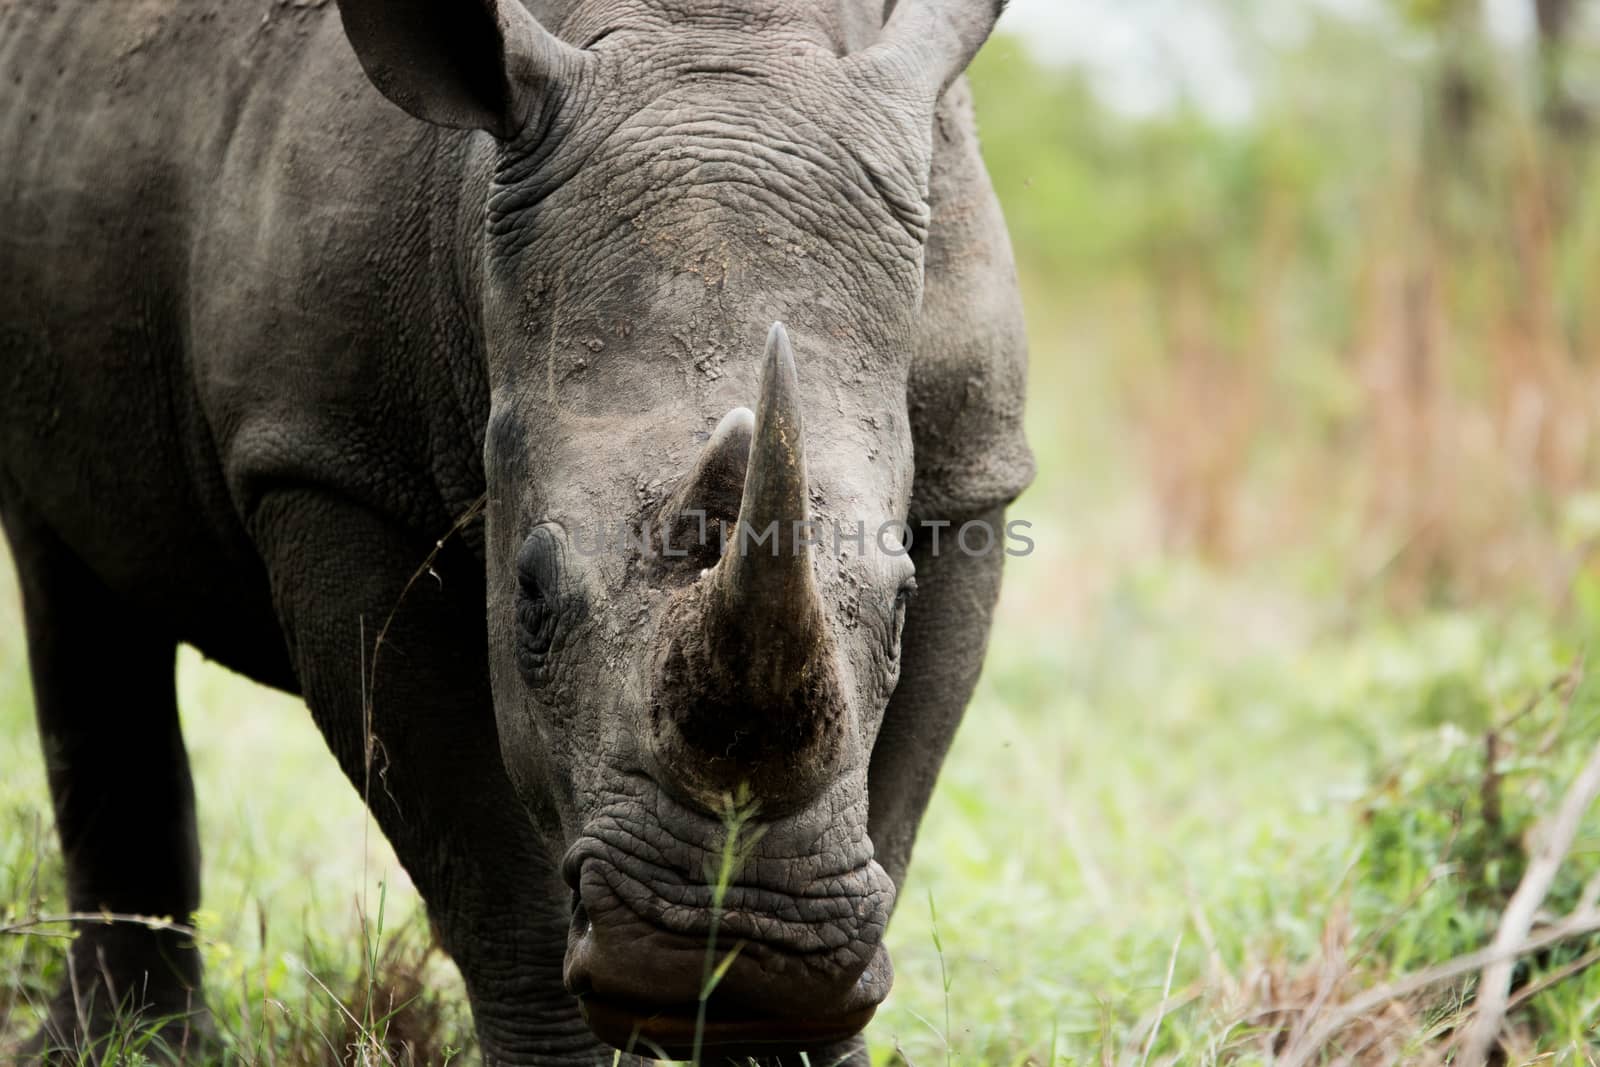 Starring White rhino in the Kruger National Park, South Africa. by Simoneemanphotography